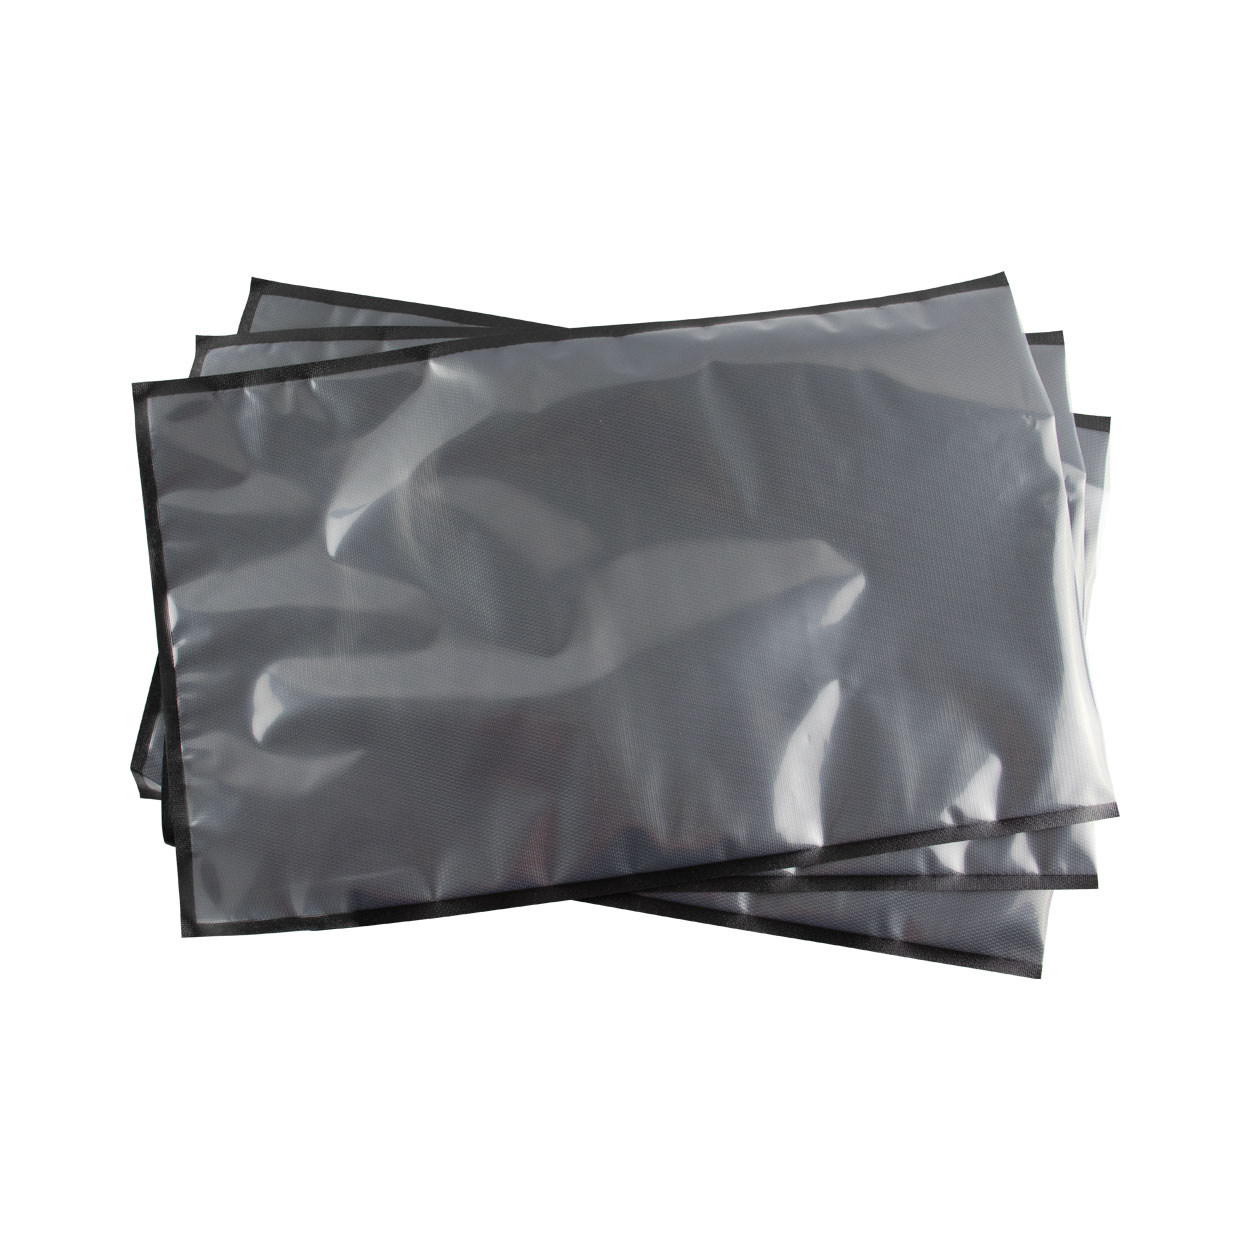 5 x 8 Clear and Metallic Vacuum Sealer Bags With Zipper SNS 3400